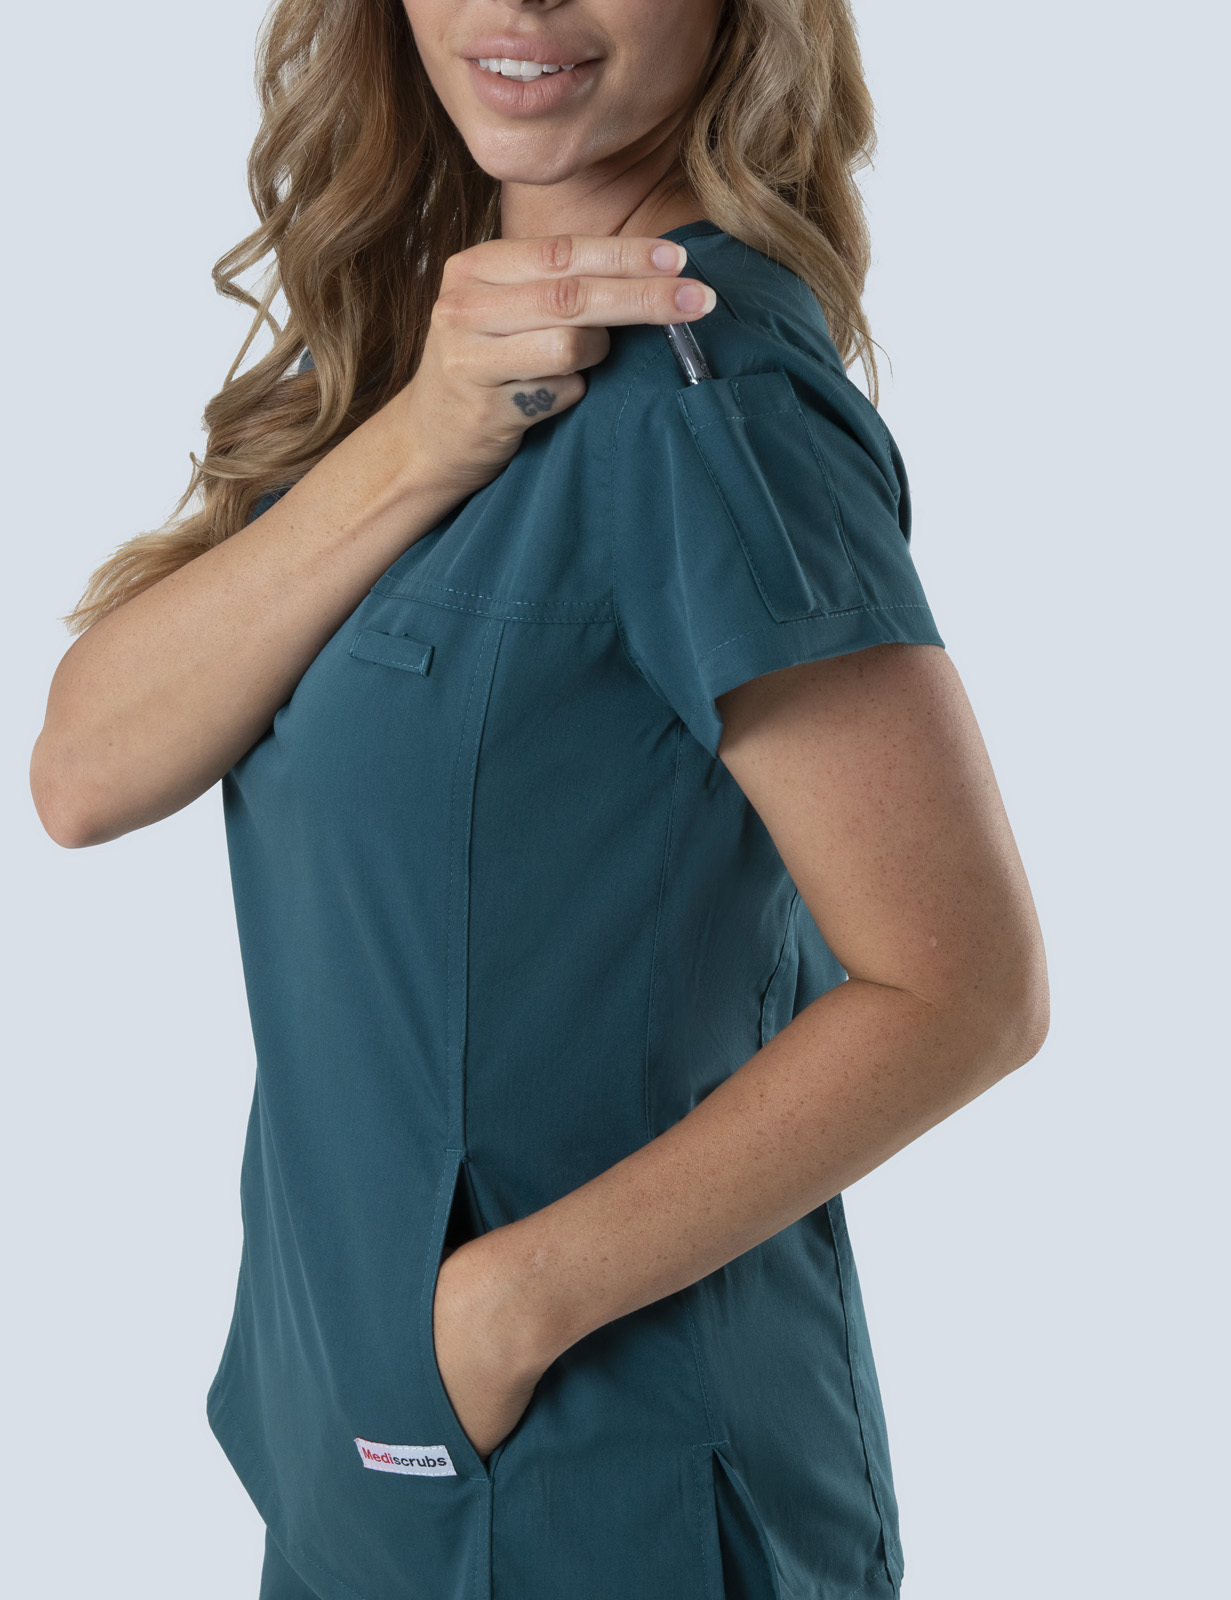 Women's Fit Solid Scrub Top - Caribbean - 3X Large - 1